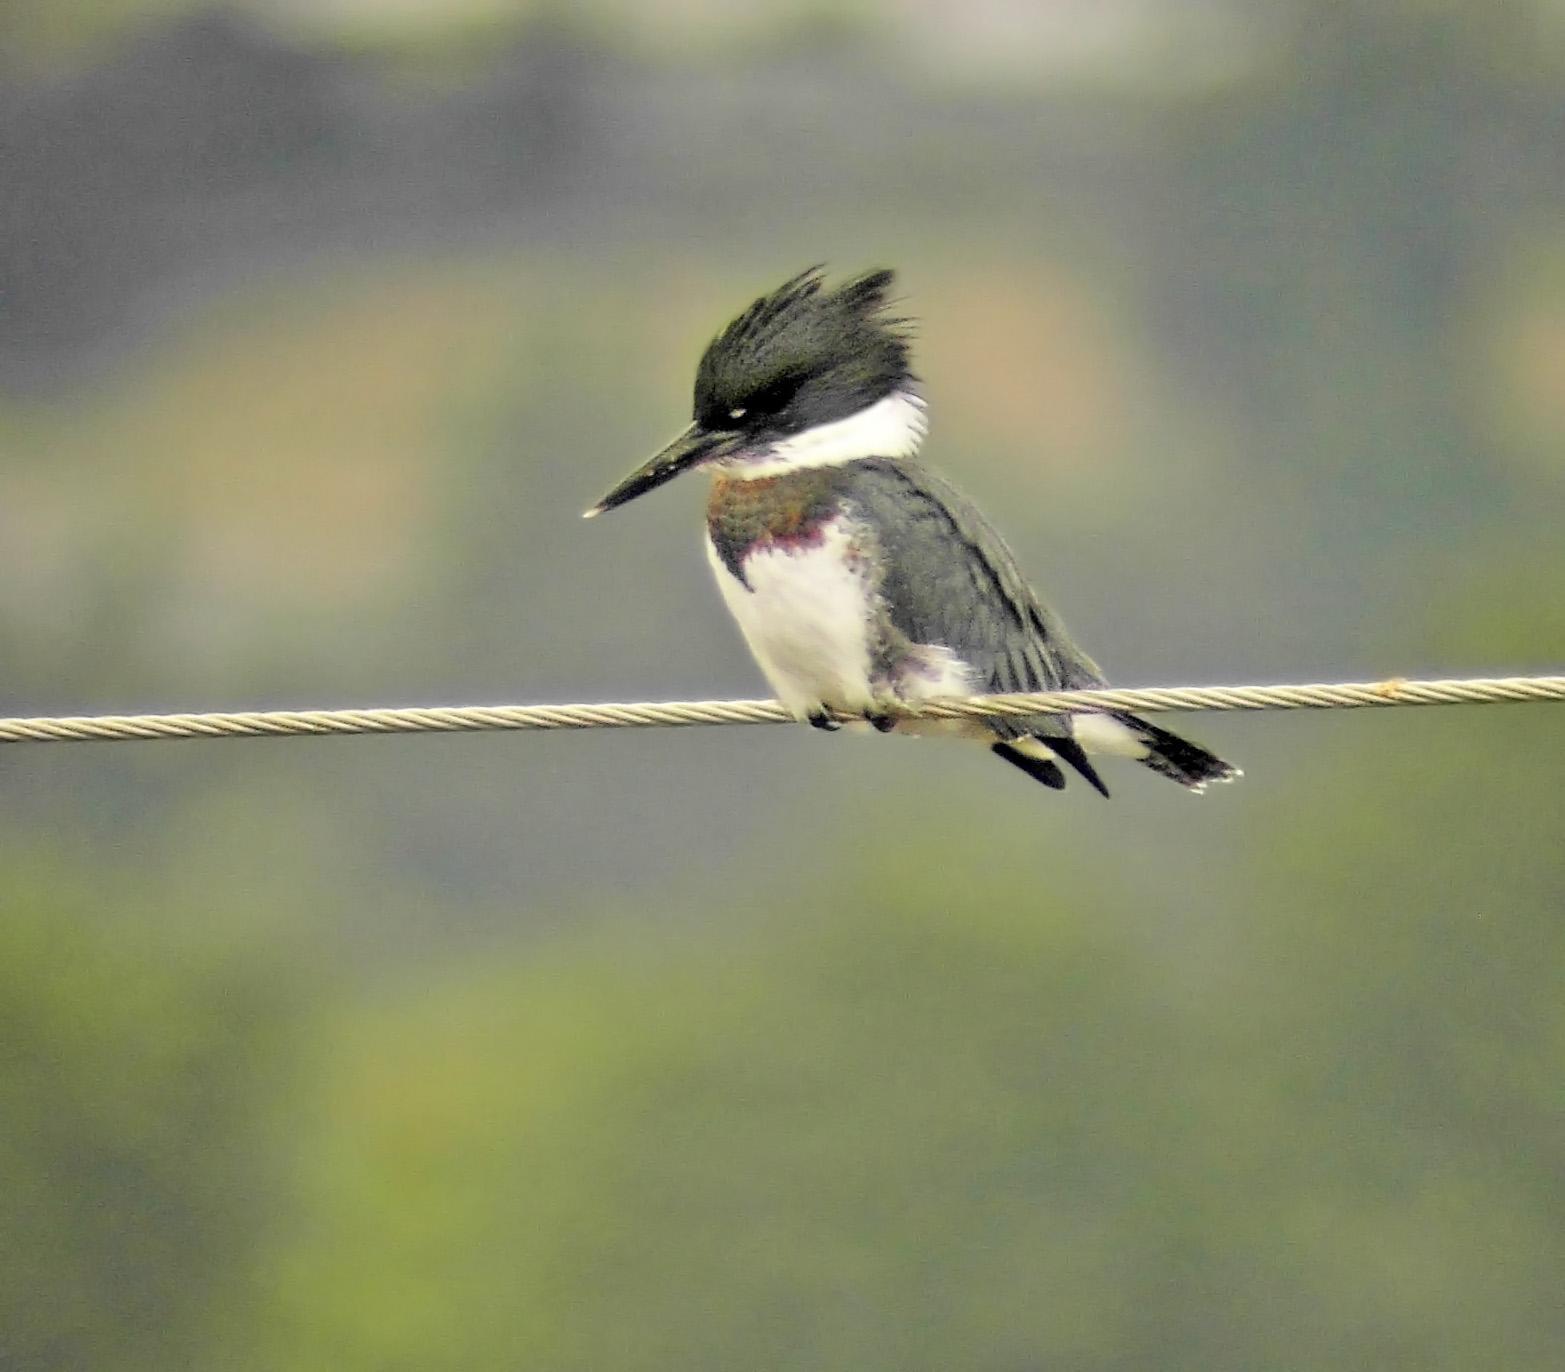 Belted Kingfisher Photo by Steven Mlodinow